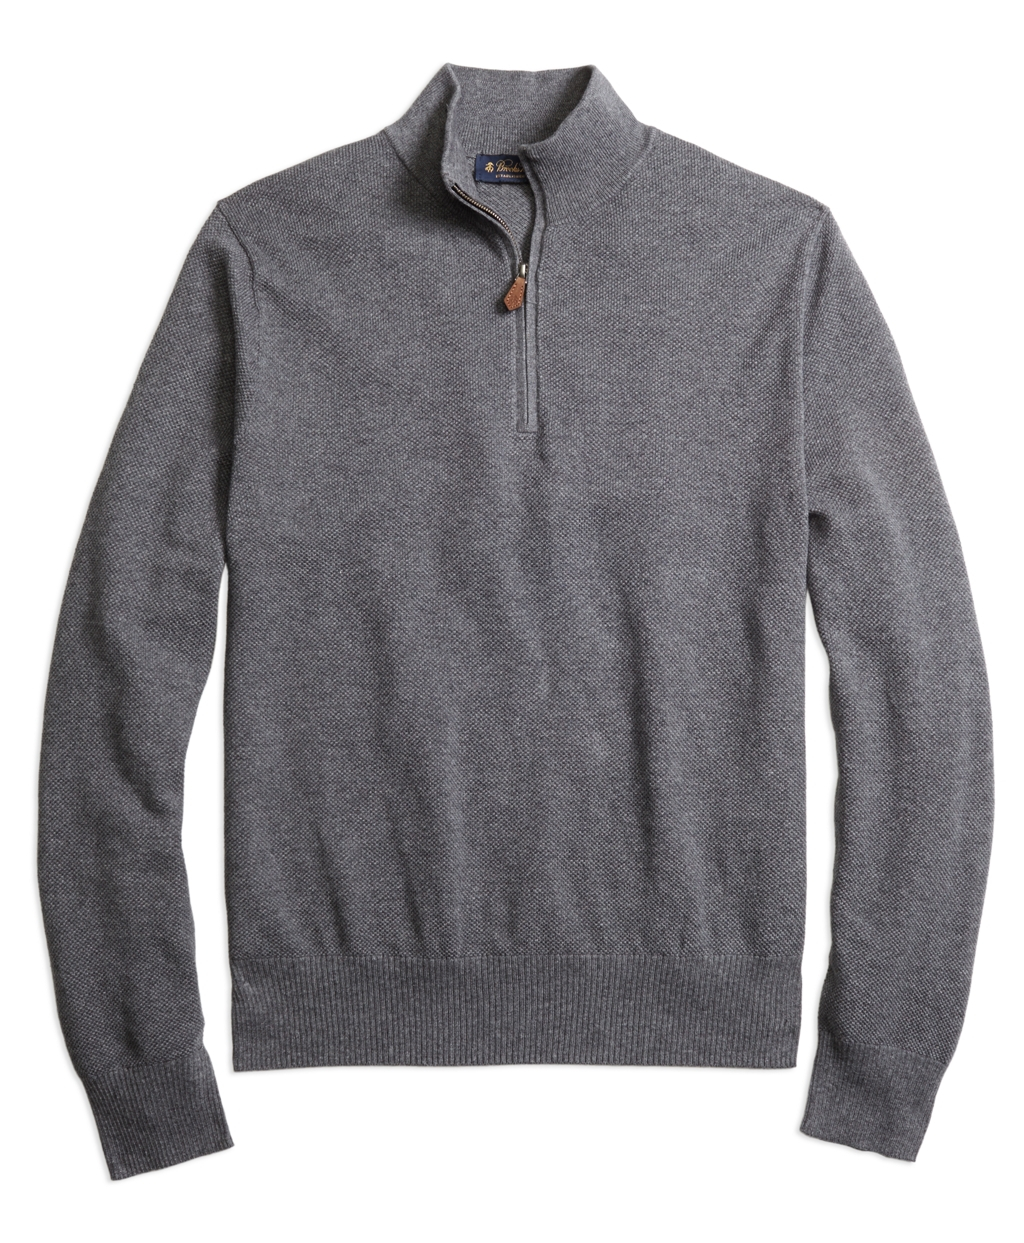 Brooks brothers Cotton Cashmere Half-zip Sweater in Gray for Men (Grey)